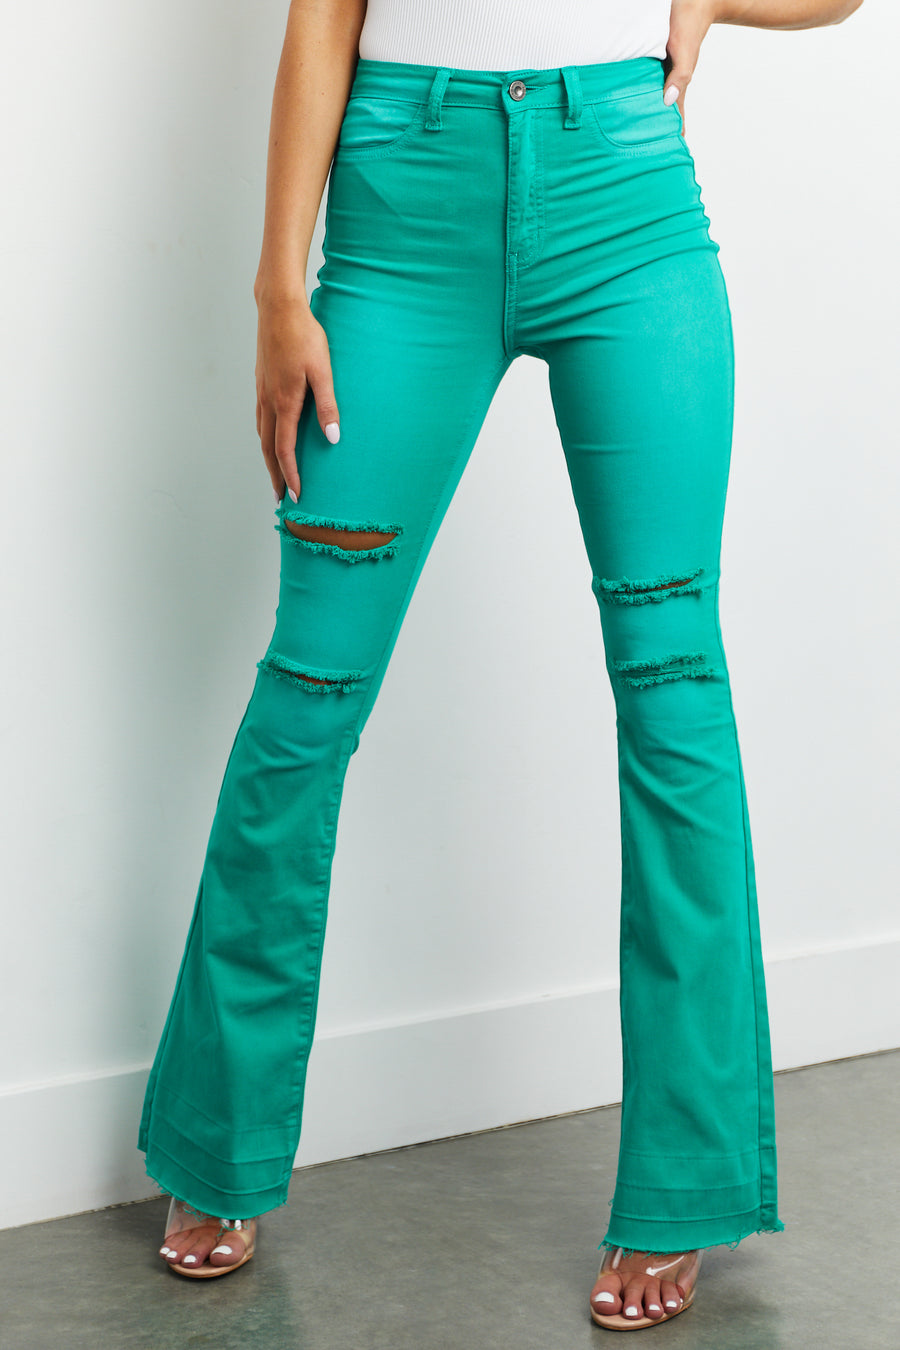 Aphrodite Kelly Green Washed High Rise Distressed Flare Jeans